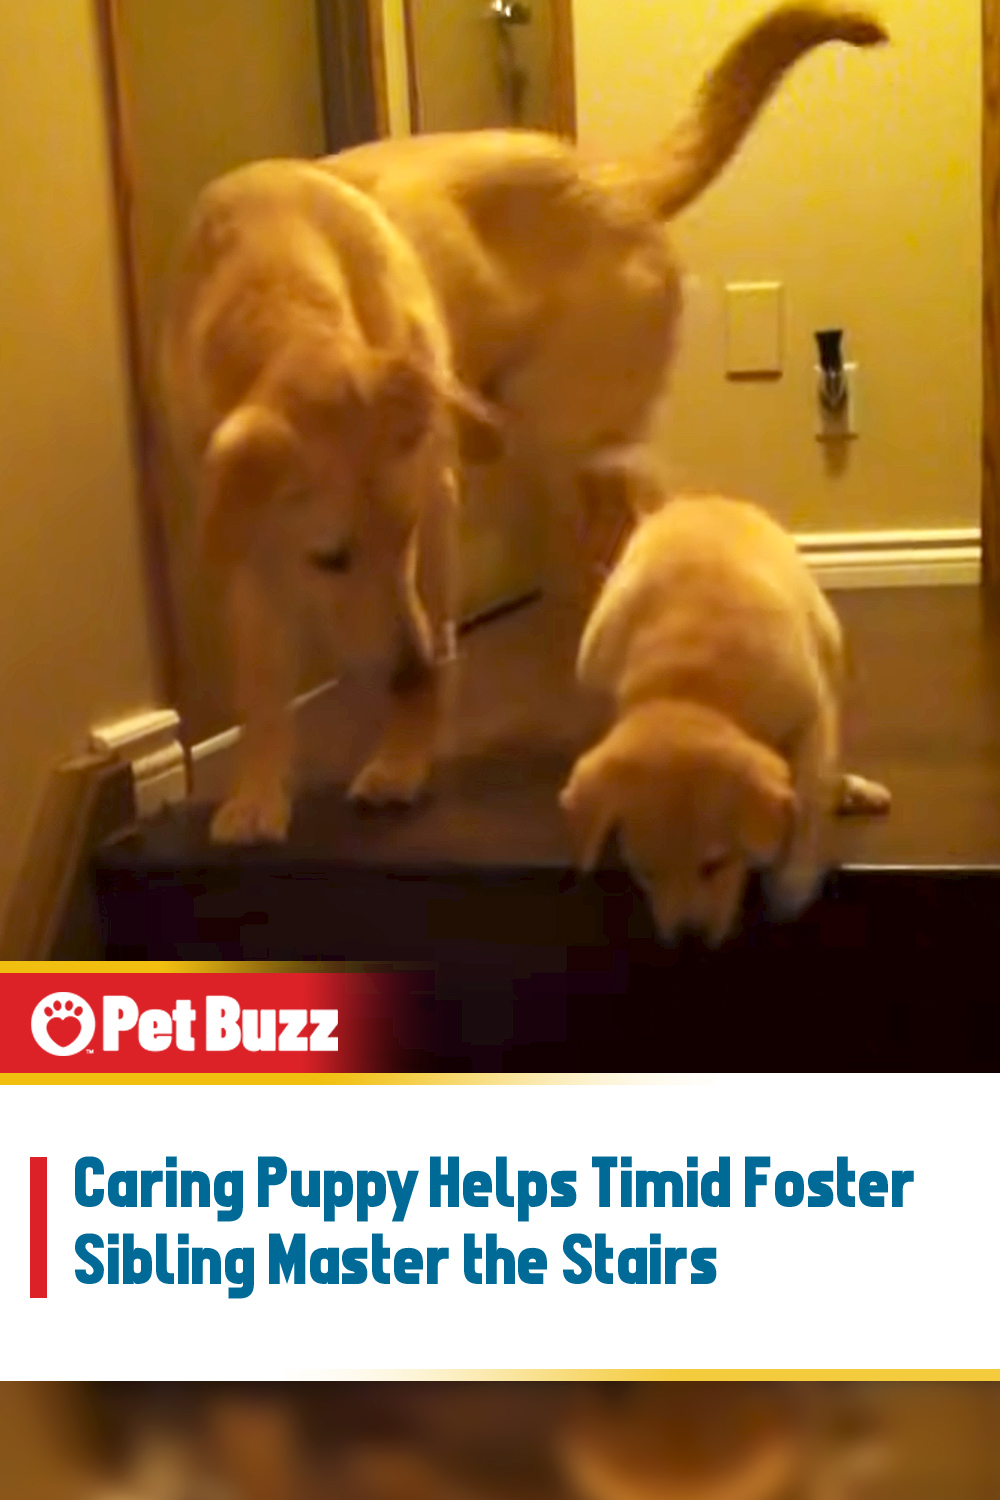 Caring Puppy Helps Timid Foster Sibling Master the Stairs